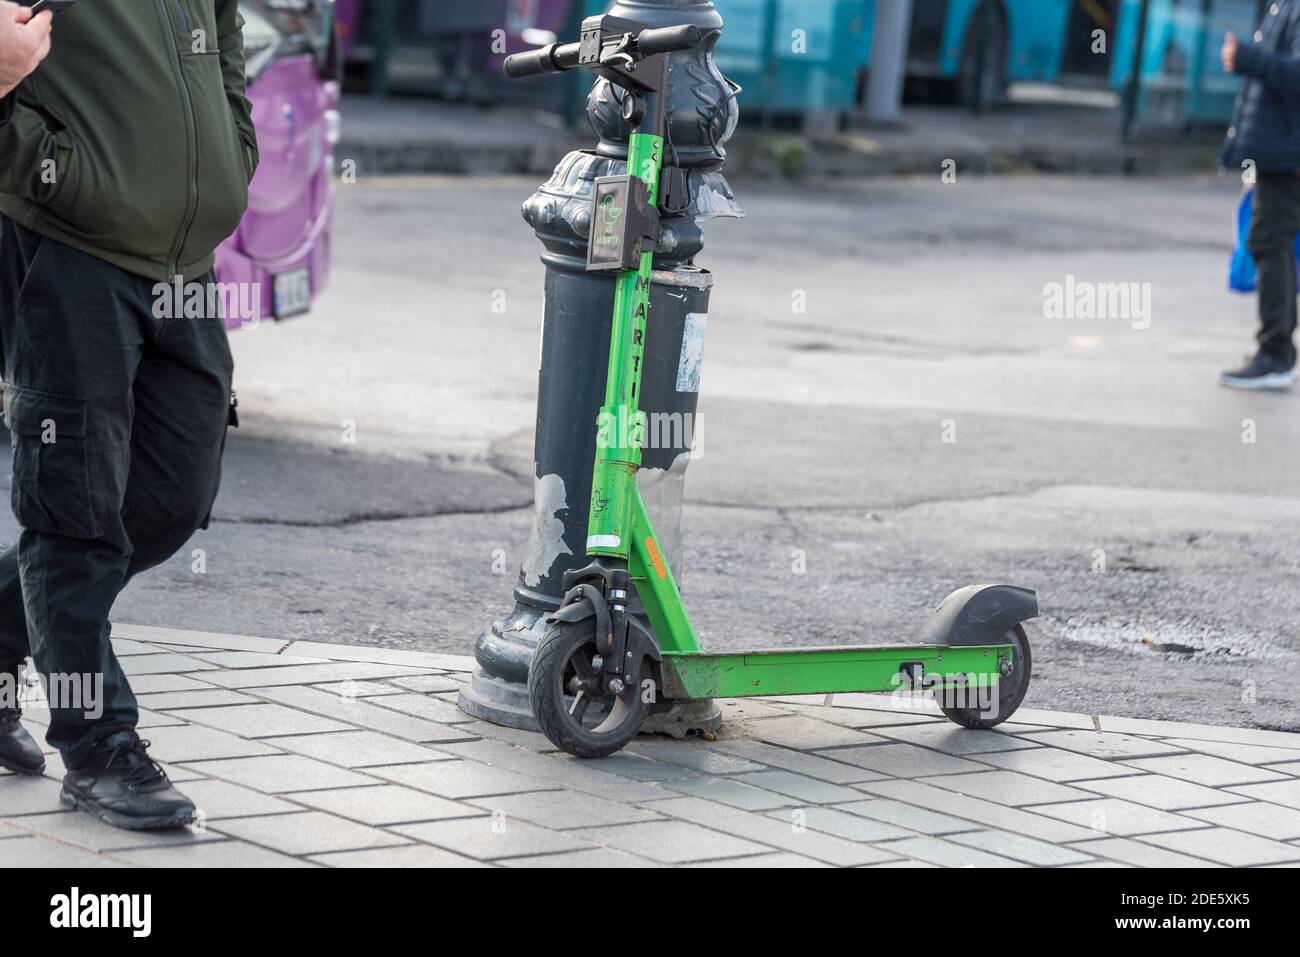 Rentable electric scooter called Marti. Urban short-range transportation  with alternative eco-friendly scooters.Istanbul,Turkey.16 November 2020  Stock Photo - Alamy